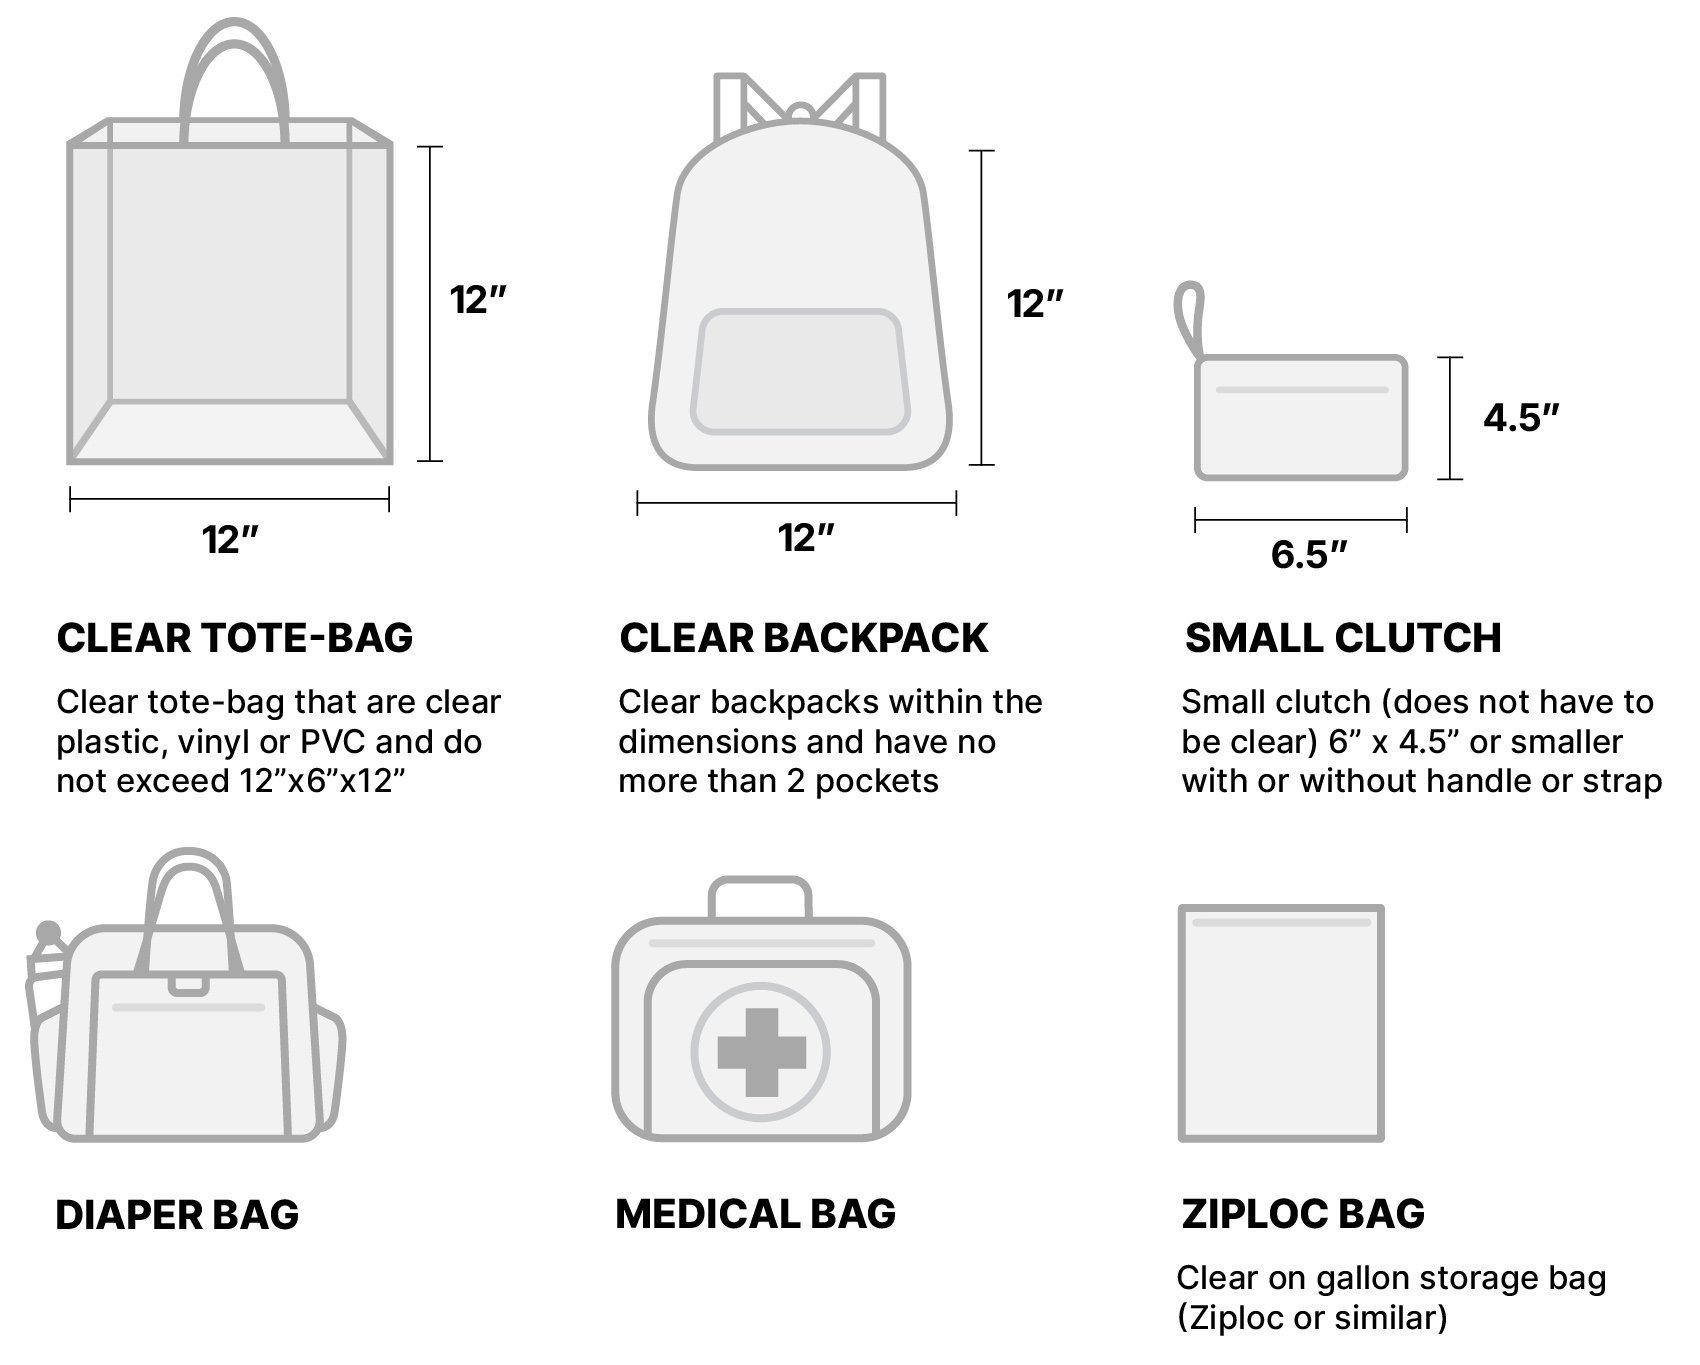 Commencement Clear Bag Policy